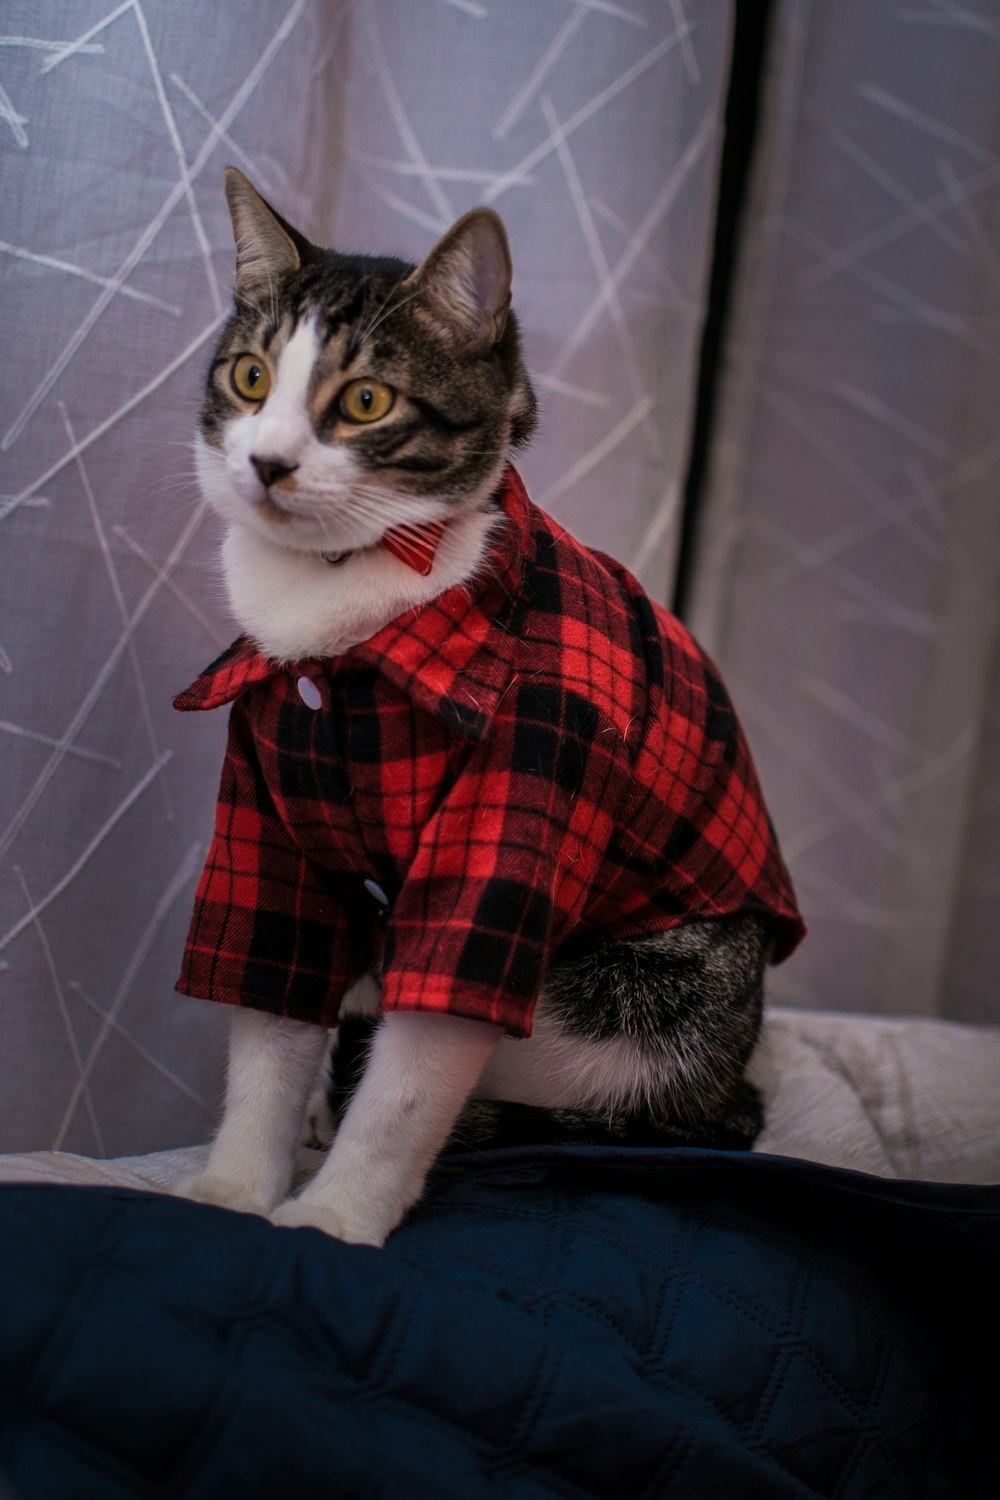 a cat sitting on top of a bed wearing a red and black shirt